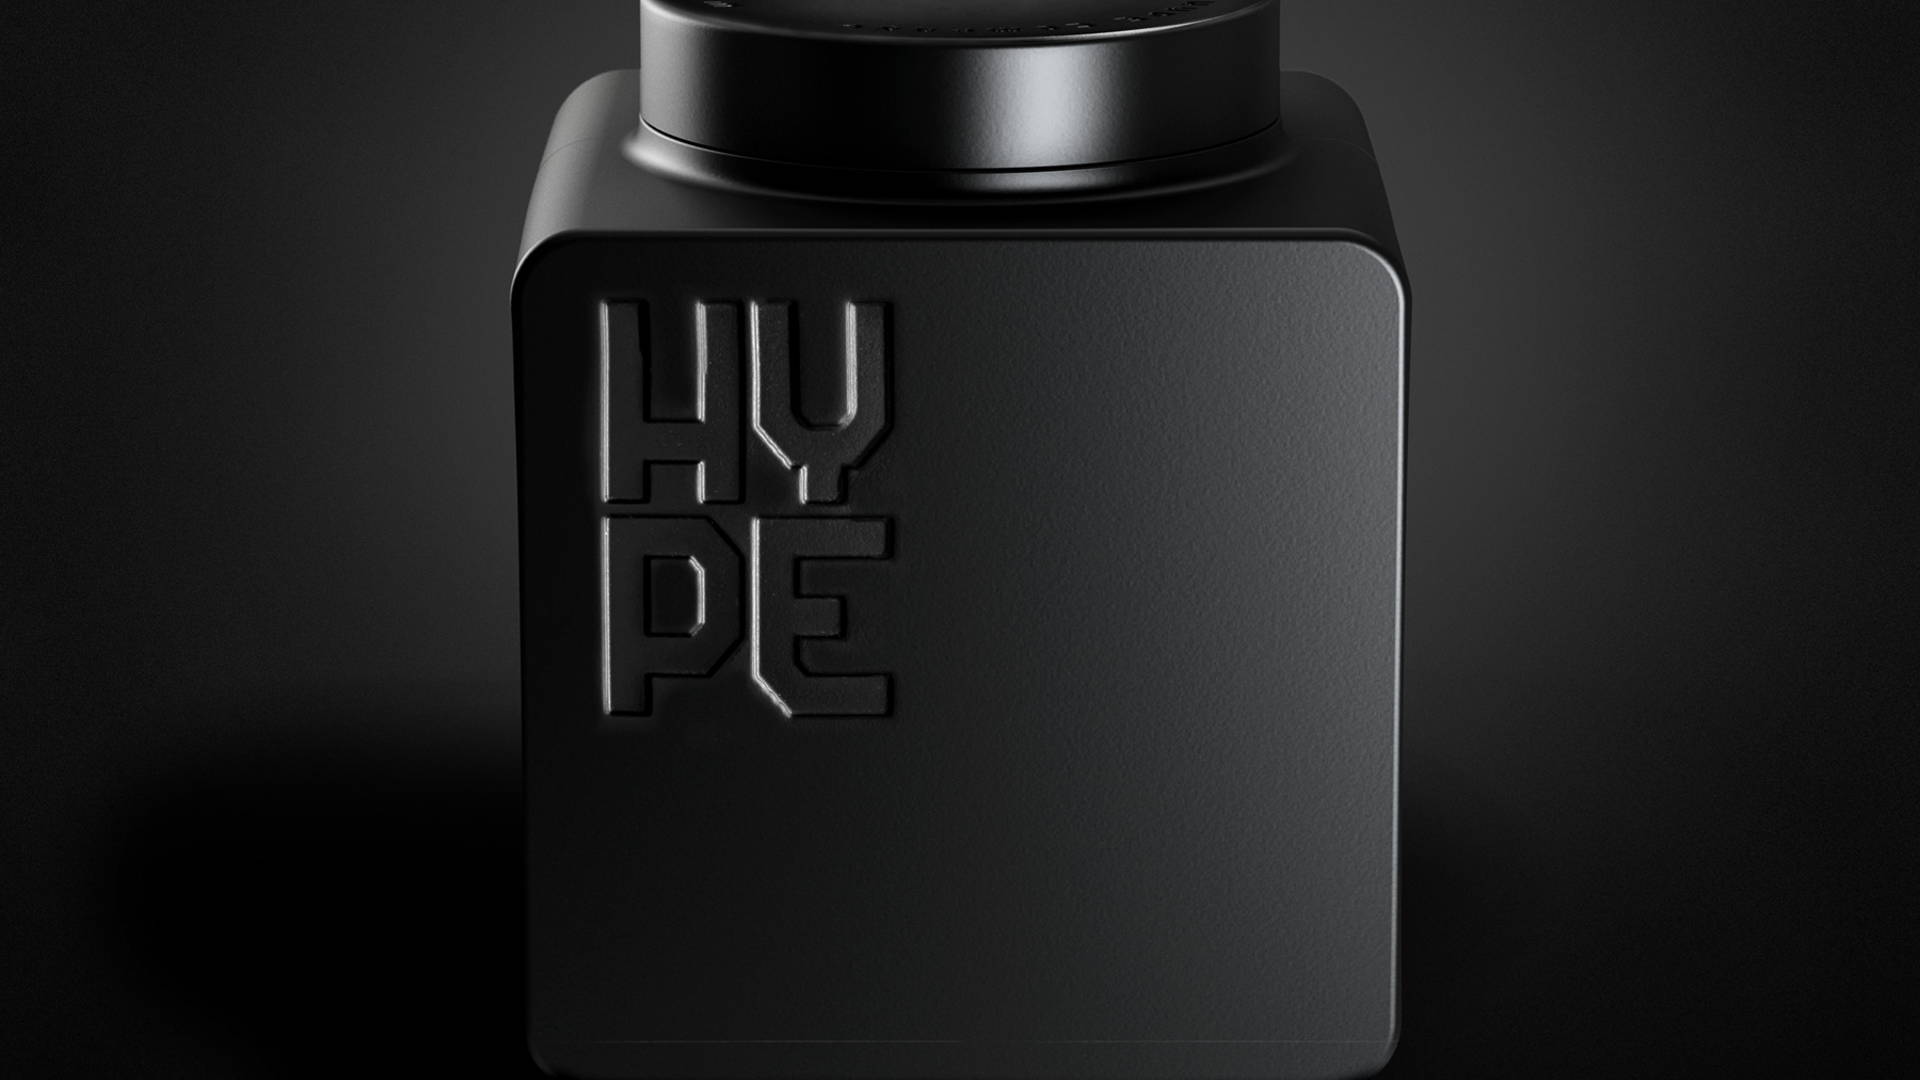 Featured image for Time To Hype Up The Hype Company's Branding